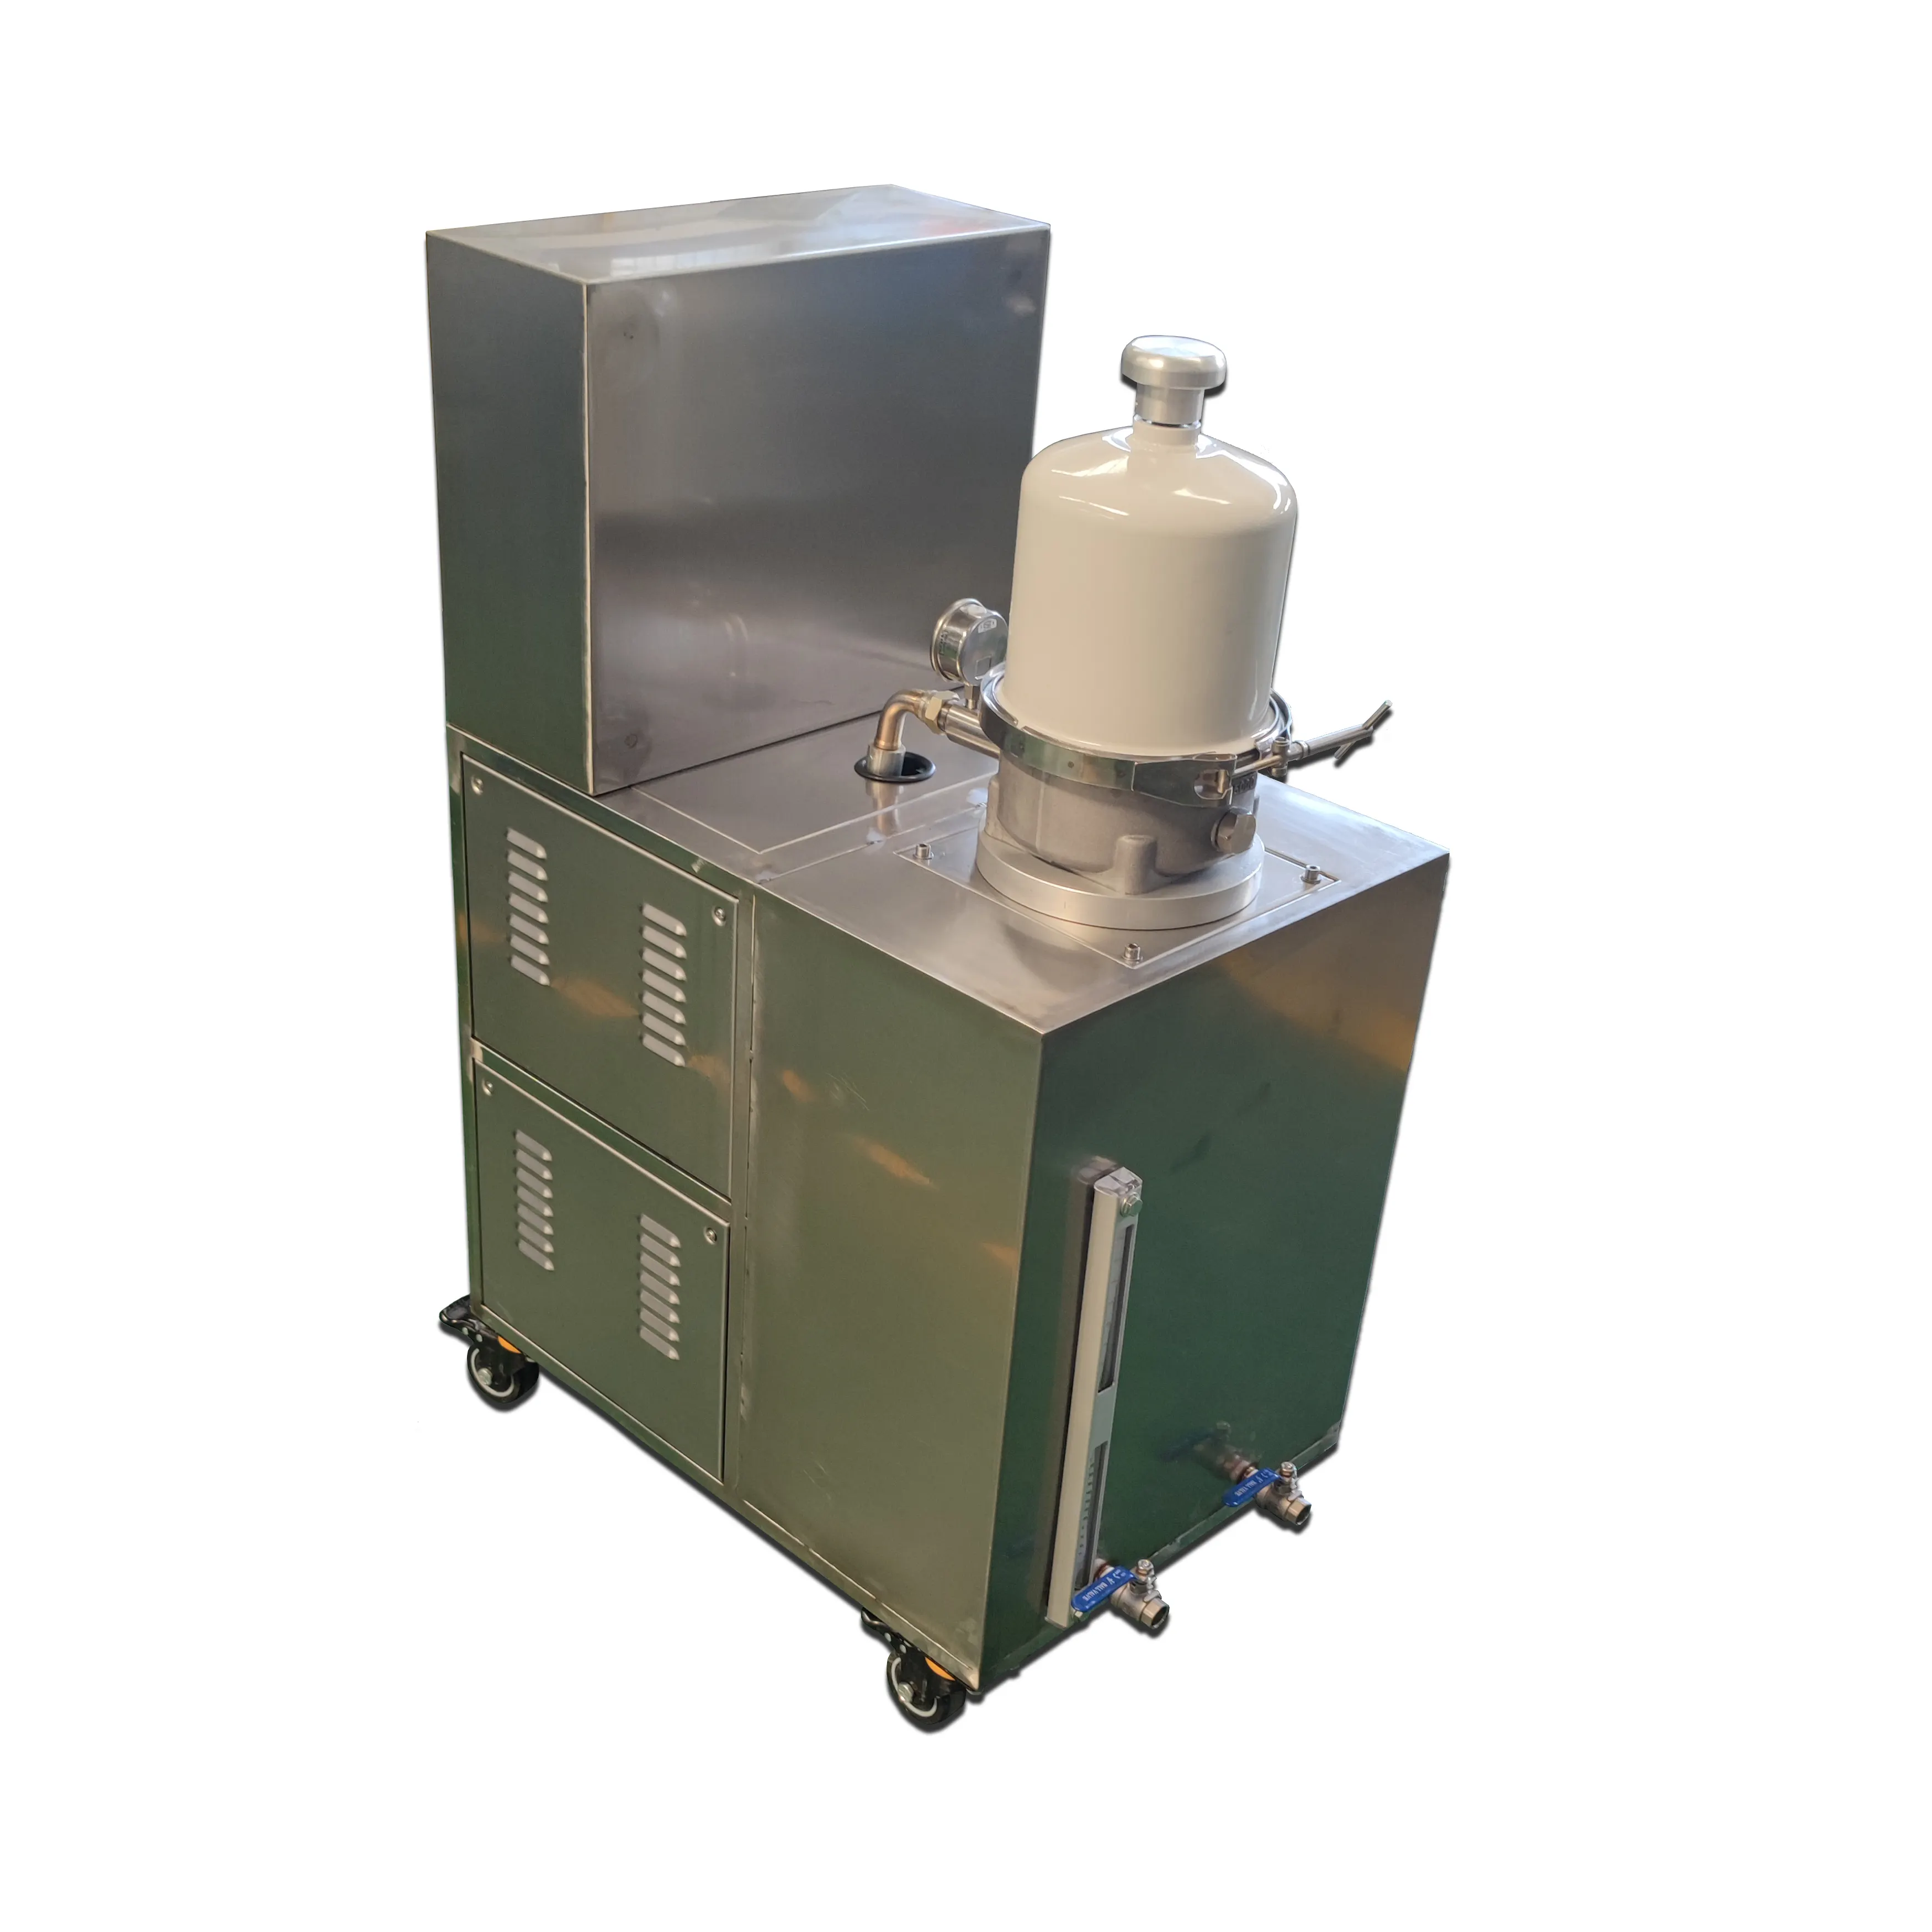 Oil filtration machine for the refrigeration oil